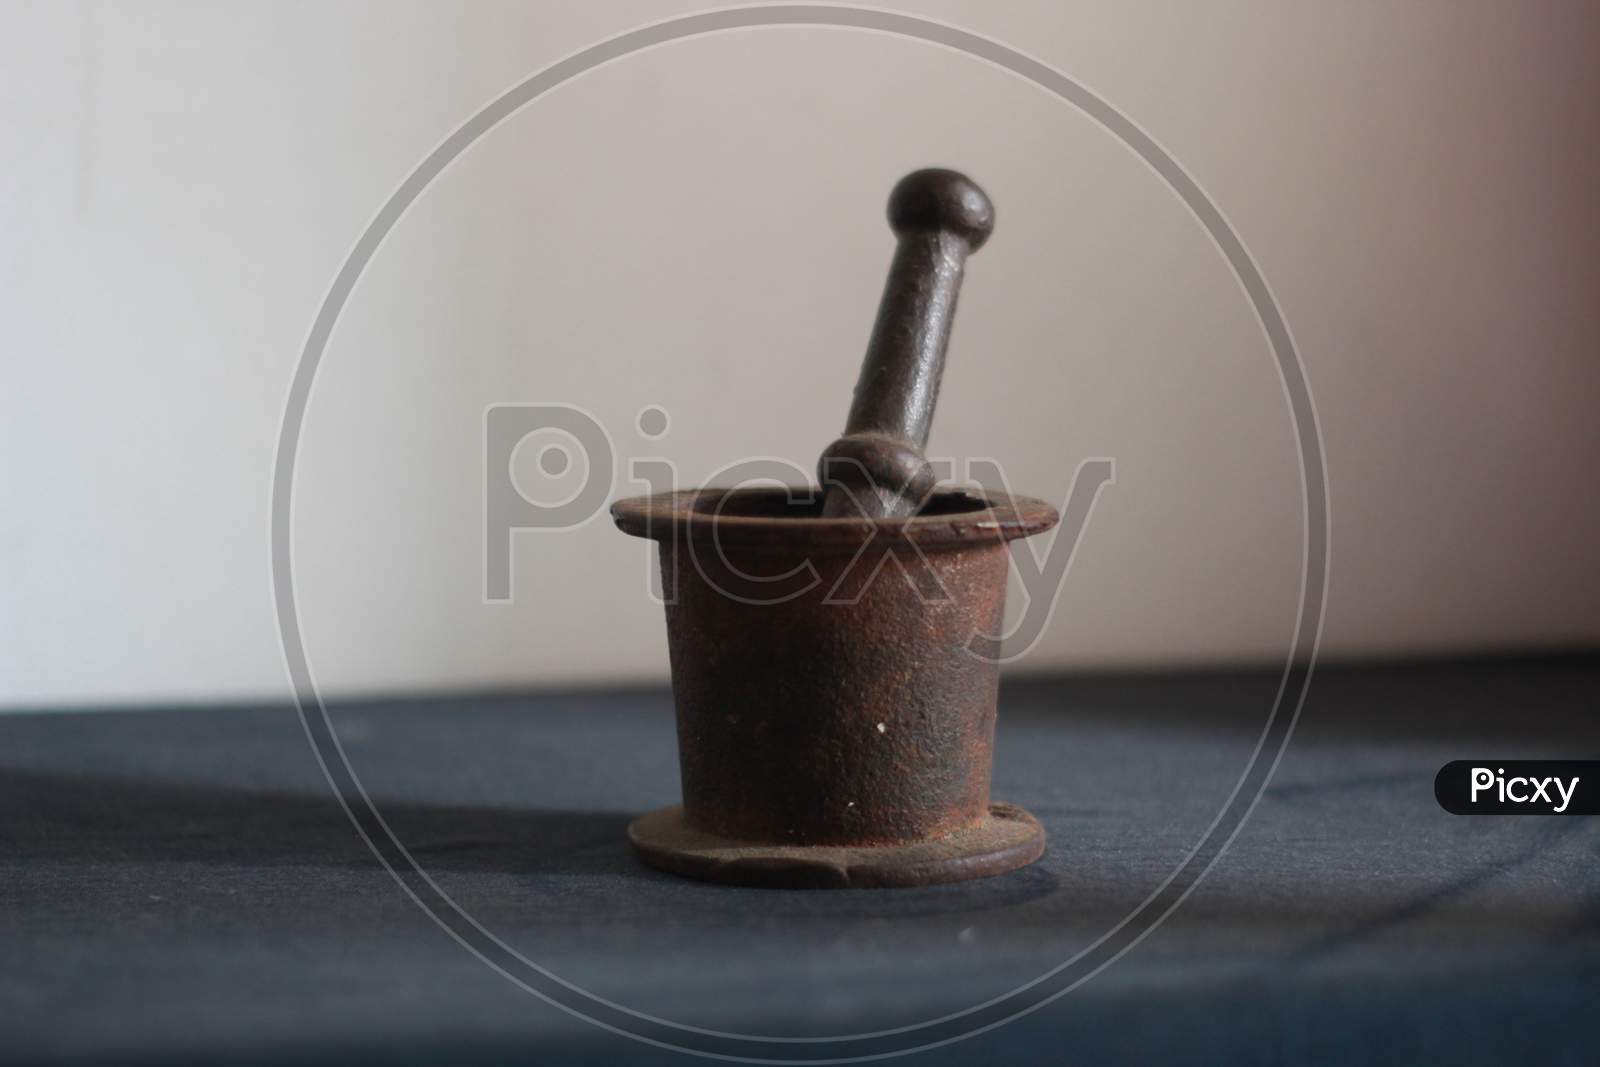 The beautiful old coffee grinder.